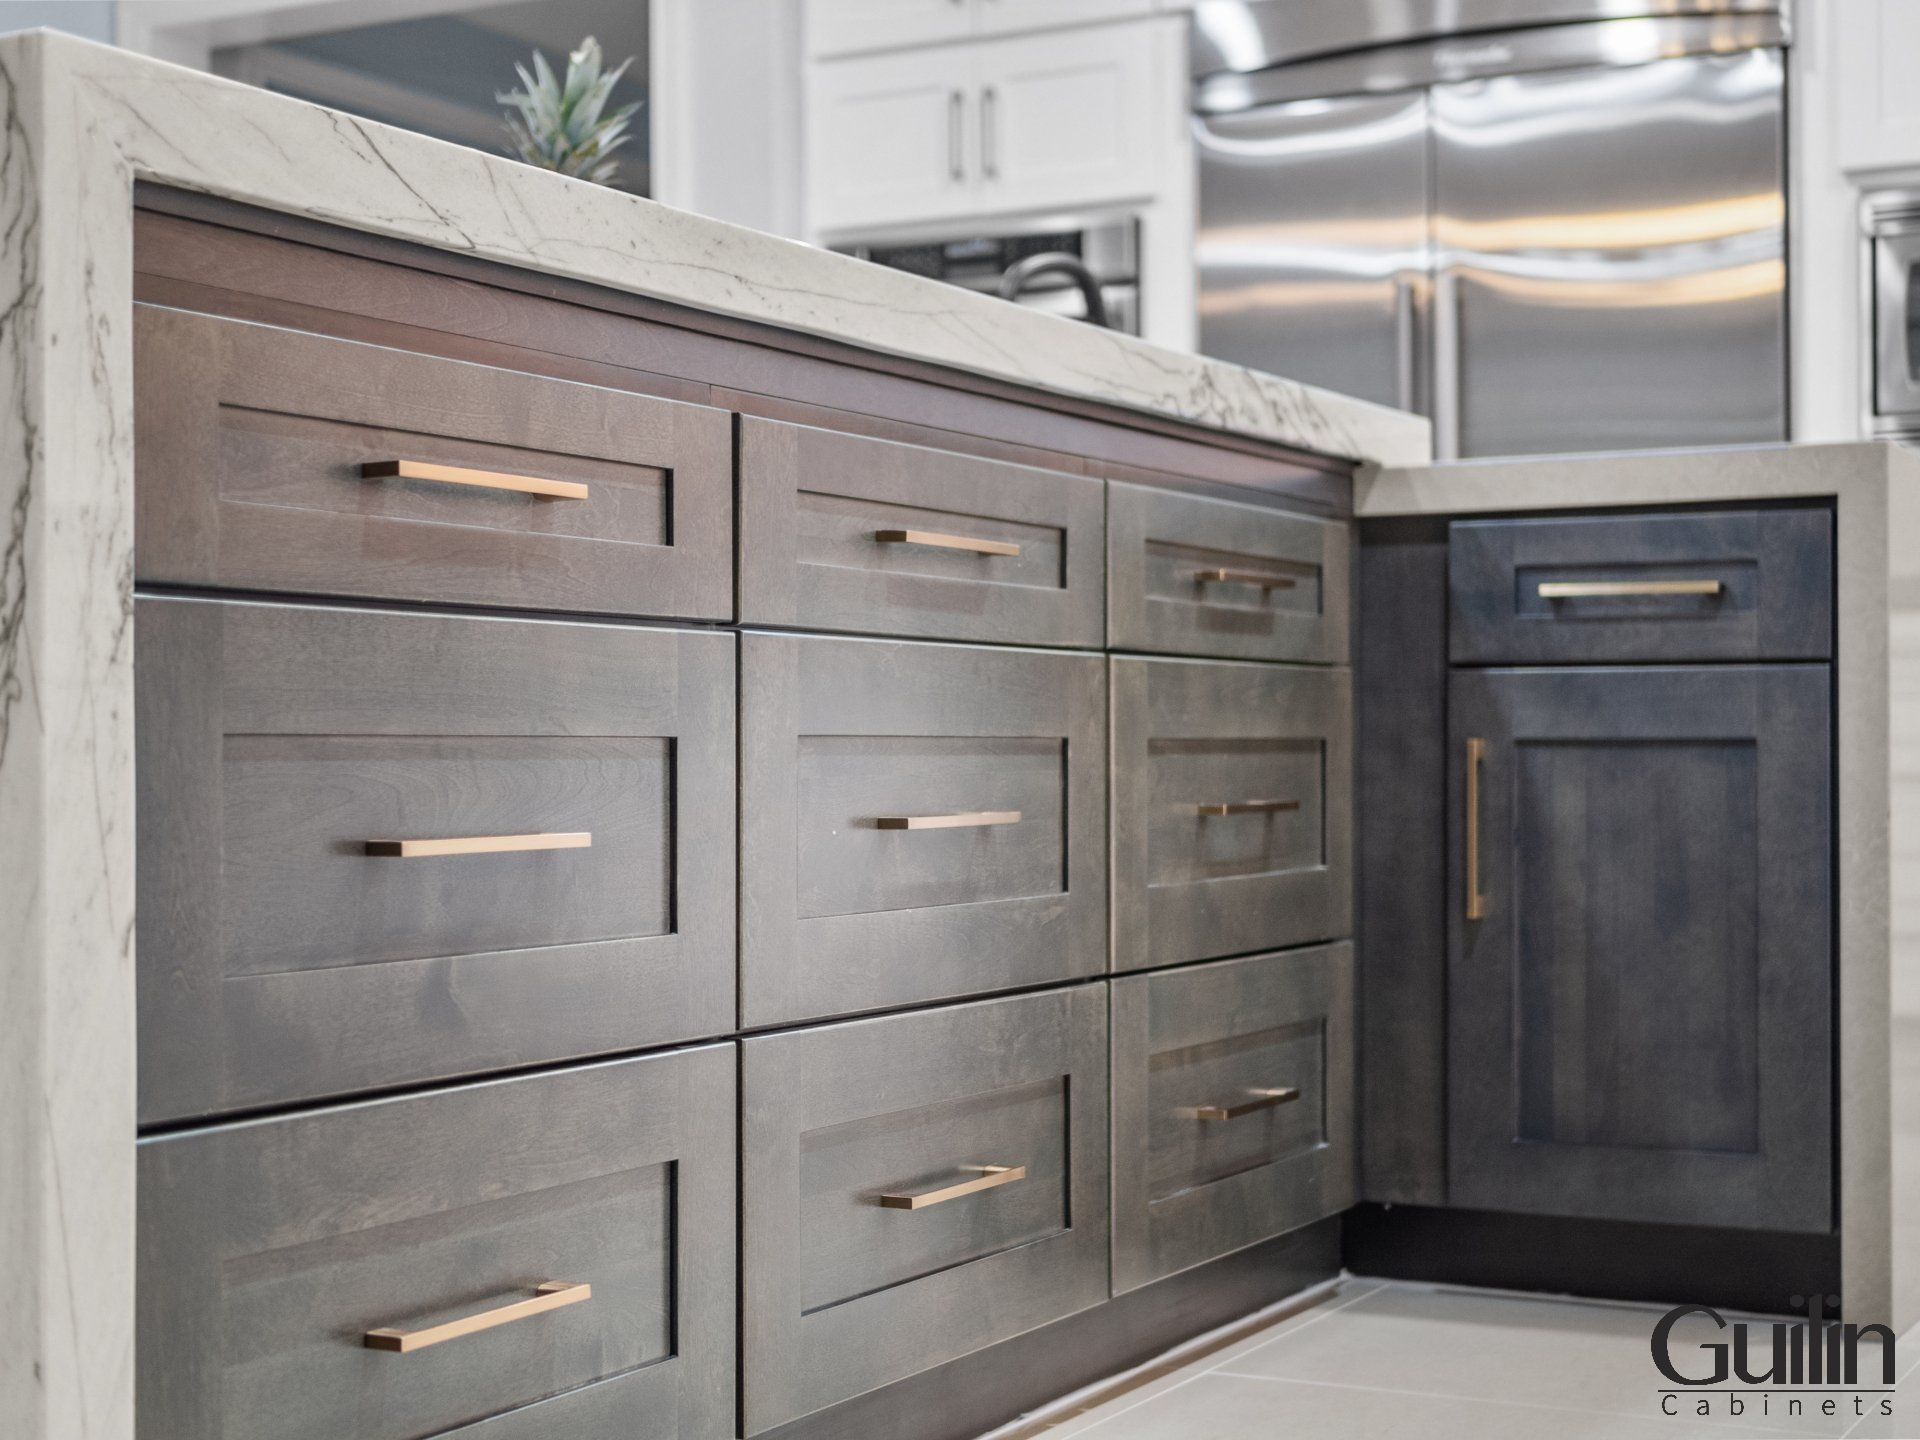 Kitchen cabinets are typically larger and higher than bathroom cabinets and are designed to store heavier kitchen items such as dishes, utensils, and food.